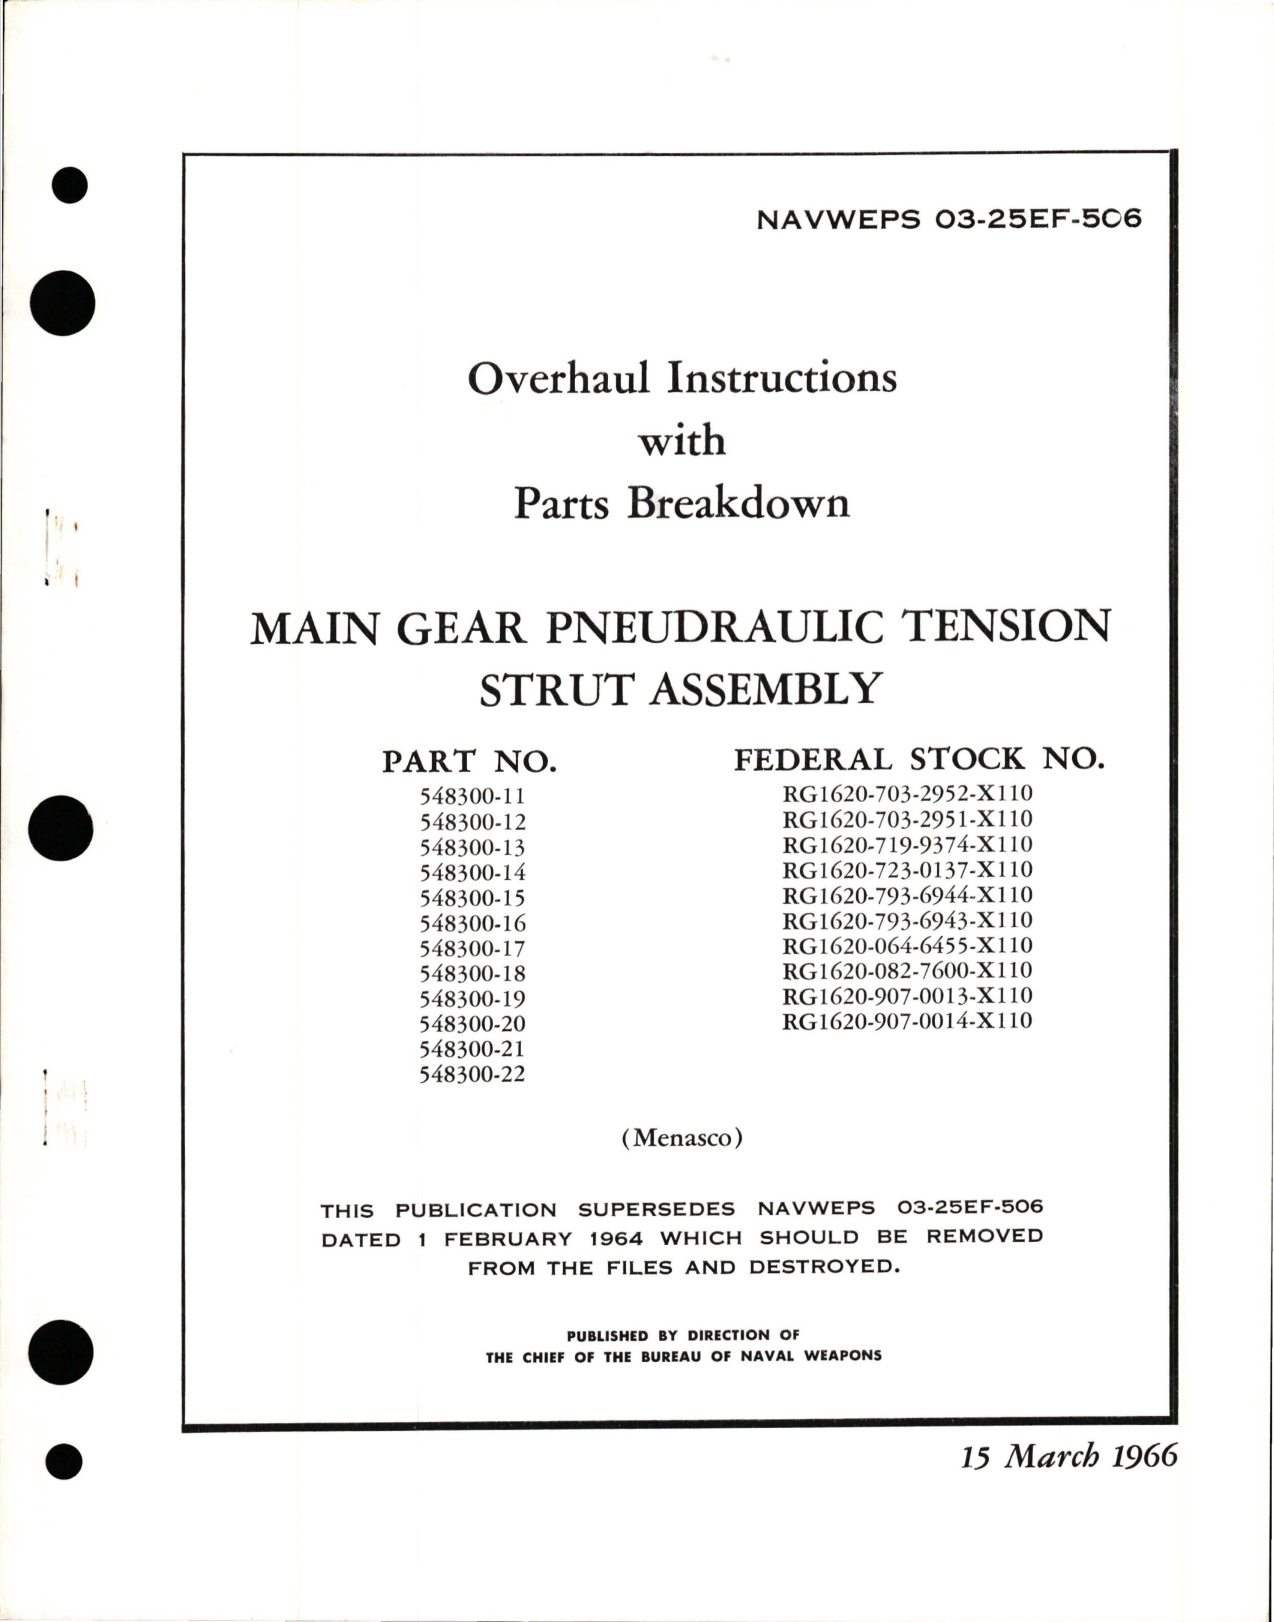 Sample page 1 from AirCorps Library document: Overhaul Instructions with Parts Breakdown for Main Gear Pneudraulic Tension Strut Assembly